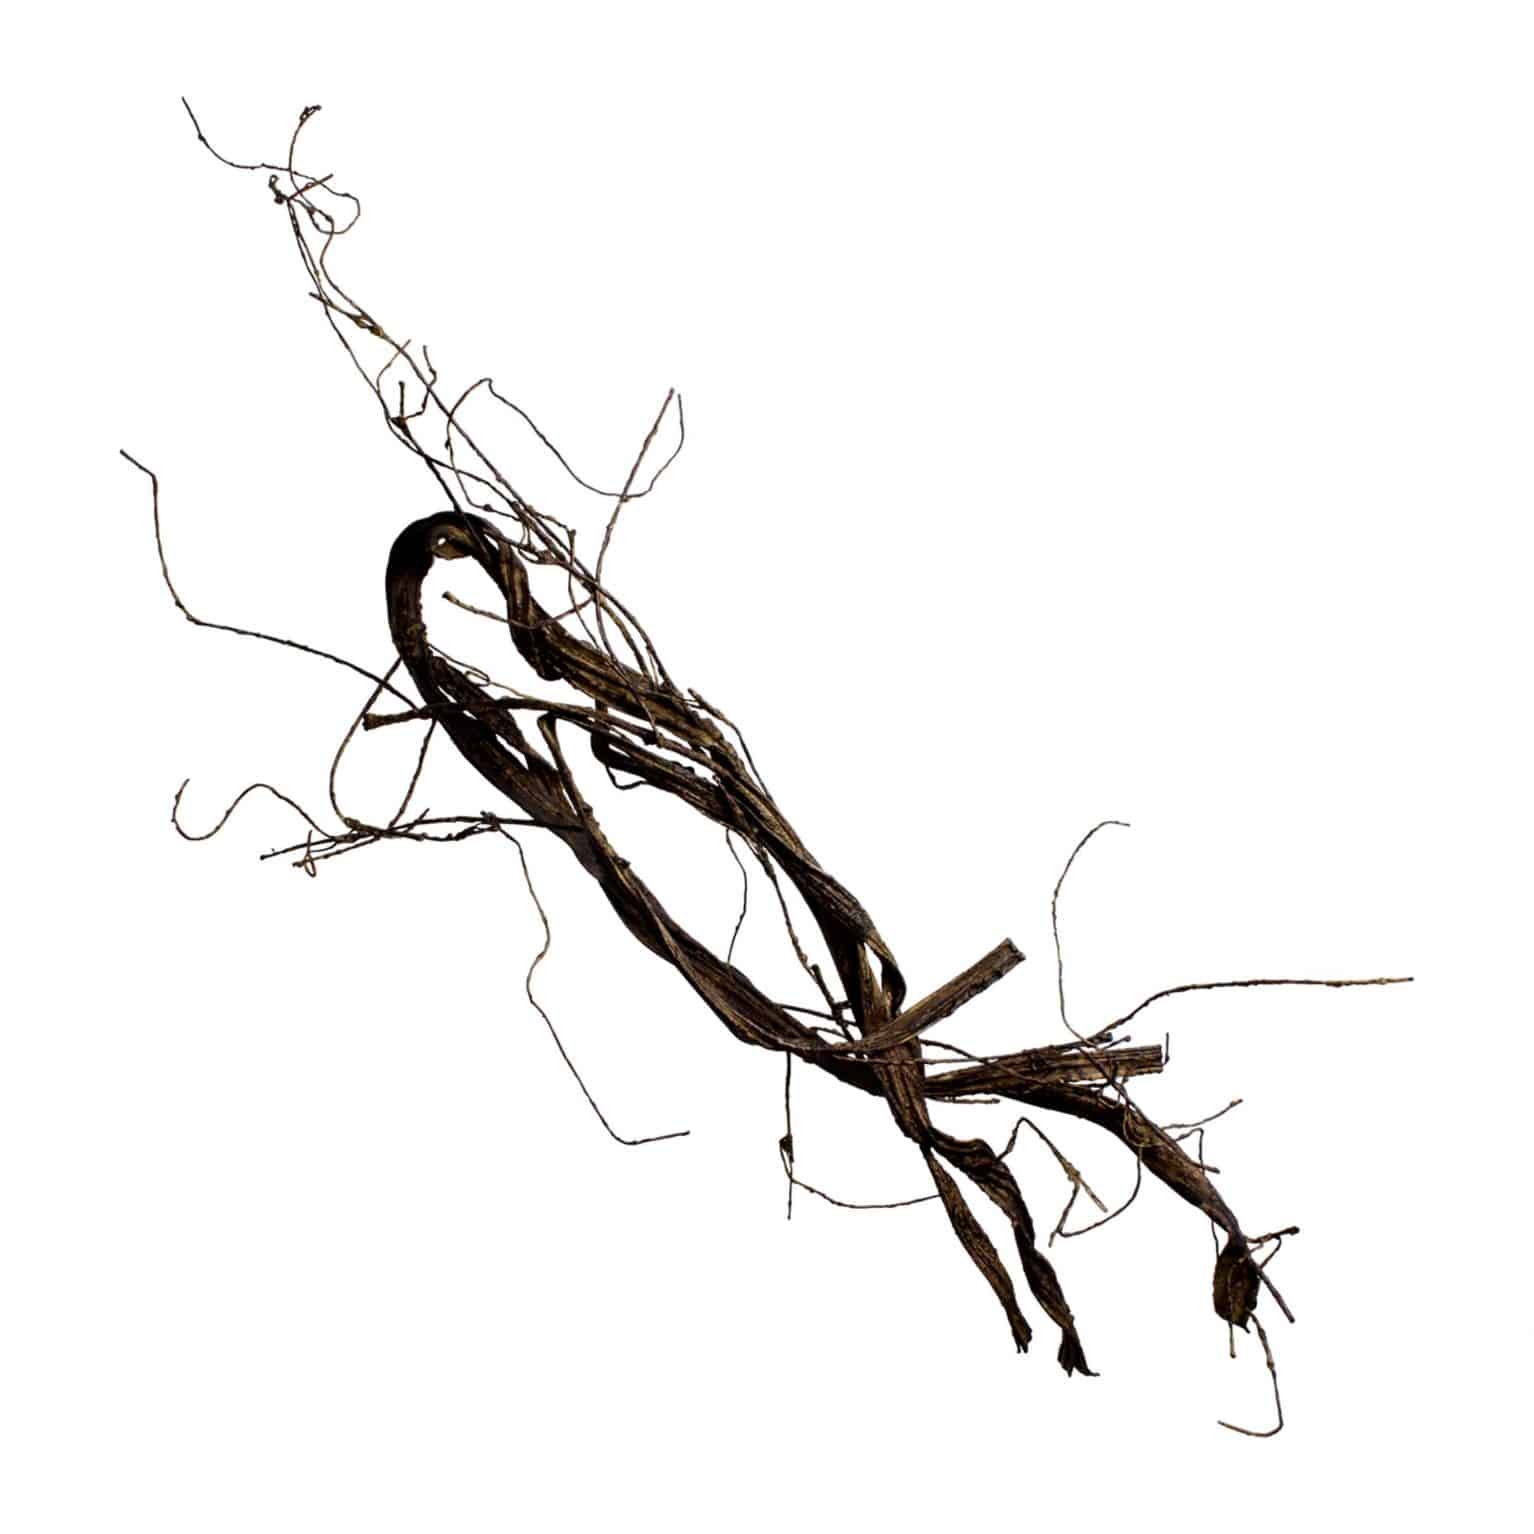 Buy our artificial flax twig to add rustic earthy beauty to your arrangement designs. Easy shape into any style